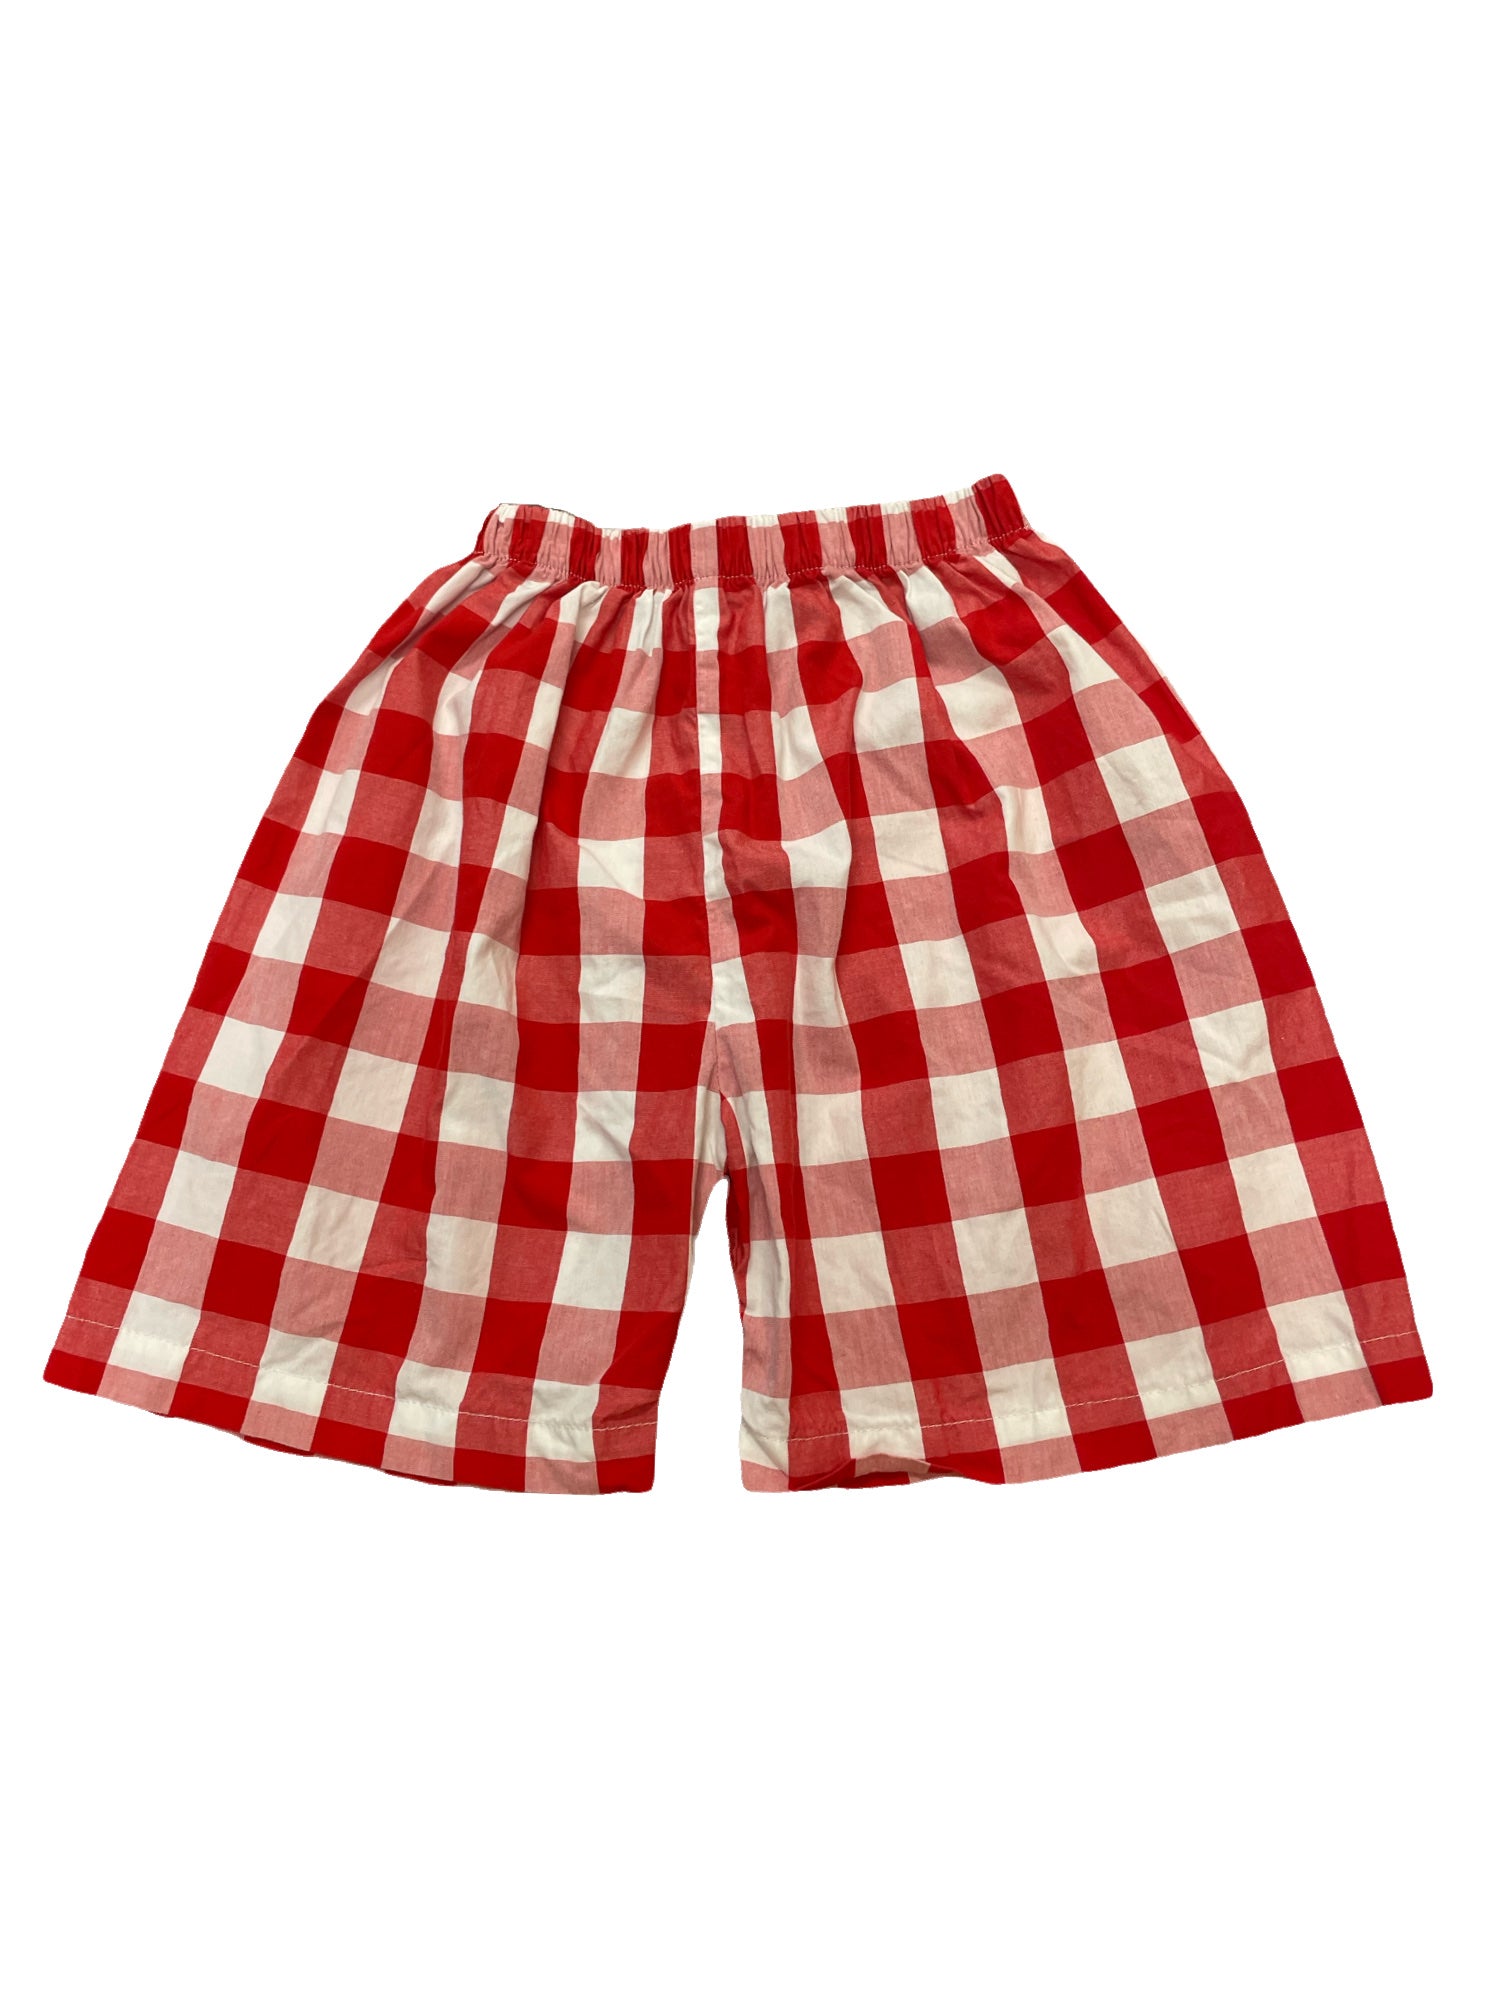 Red Gingham Shorts sz 5